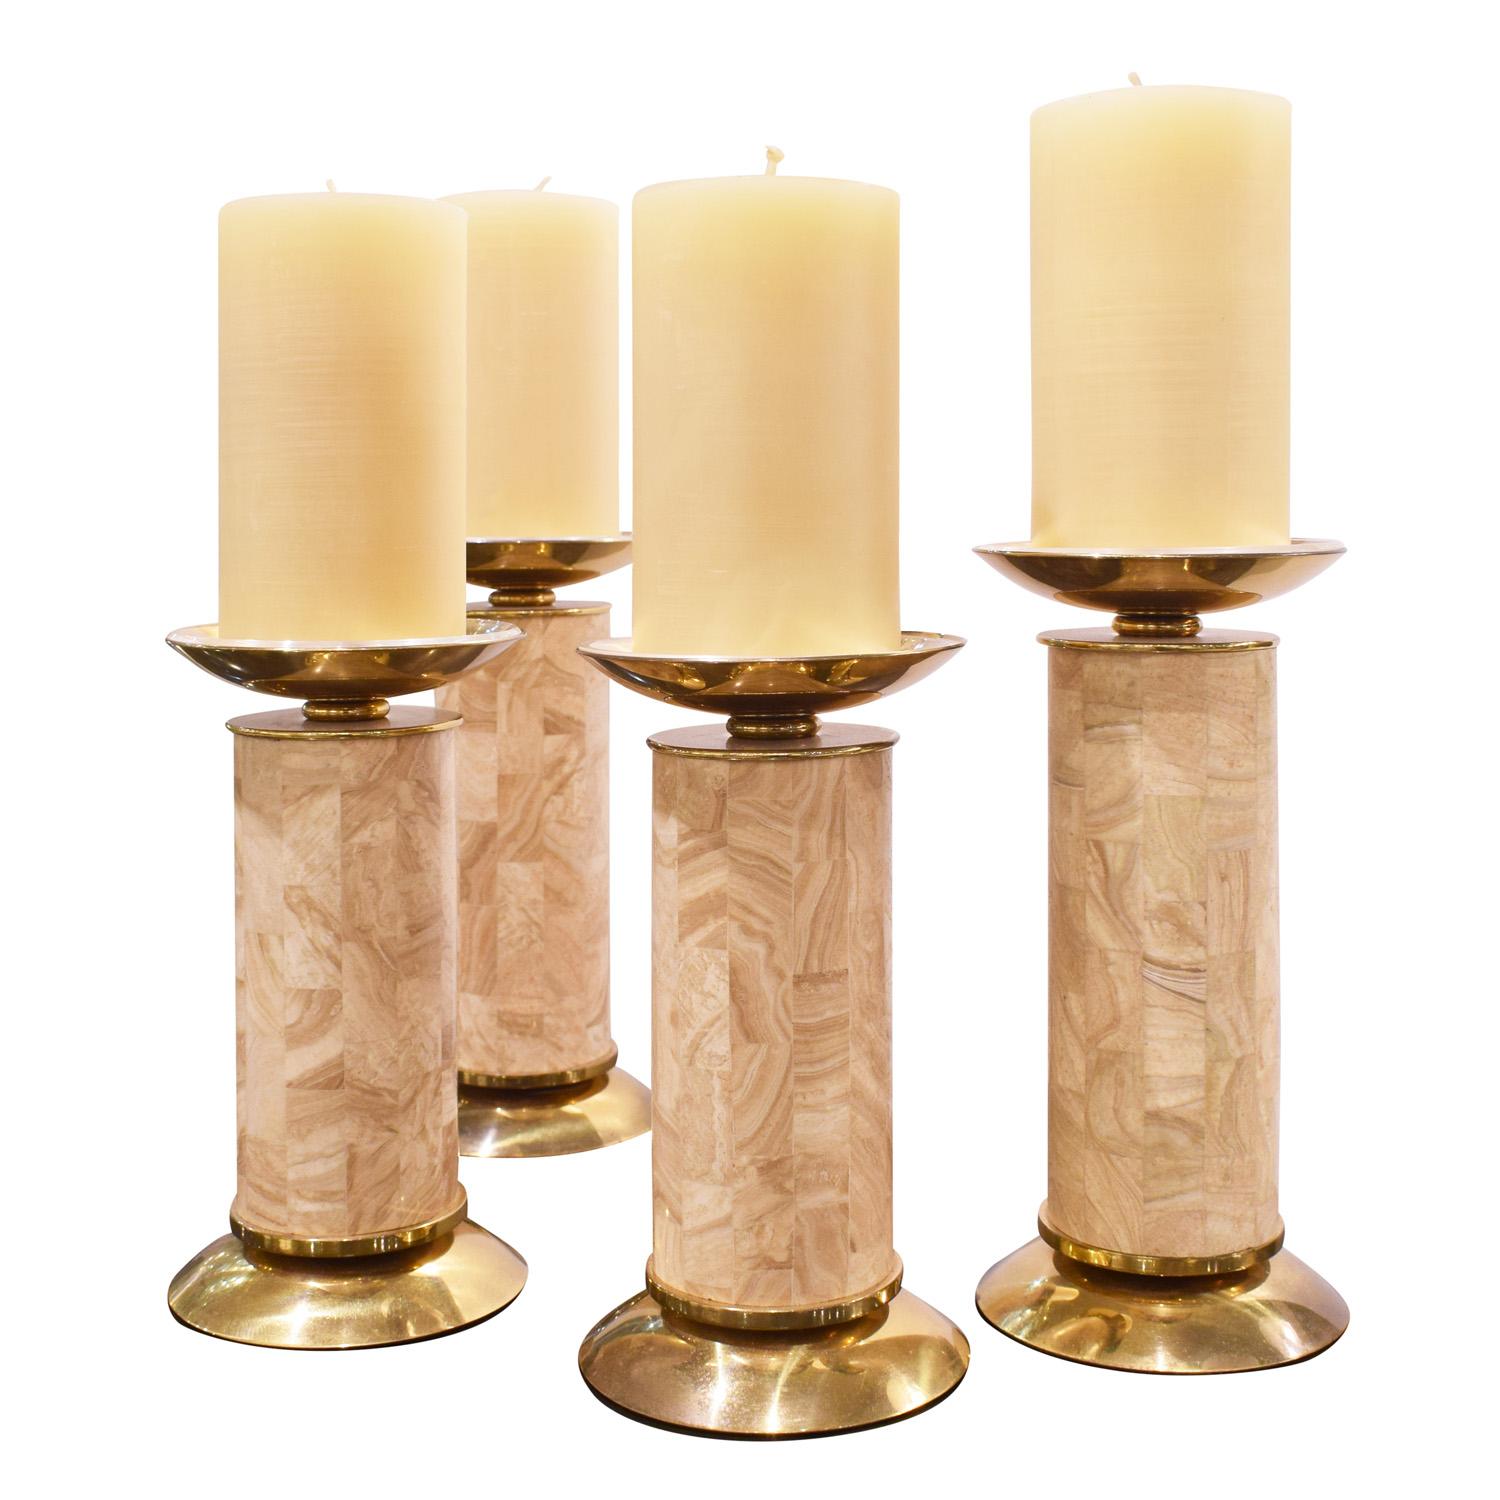 Exceptional set of 4 candle holders in tessellated stalactite travertine and polished brass by Karl Springer, American 1980's (retains original showroom labels on bottoms). This set is meticulously made in beautiful materials. These are one of the